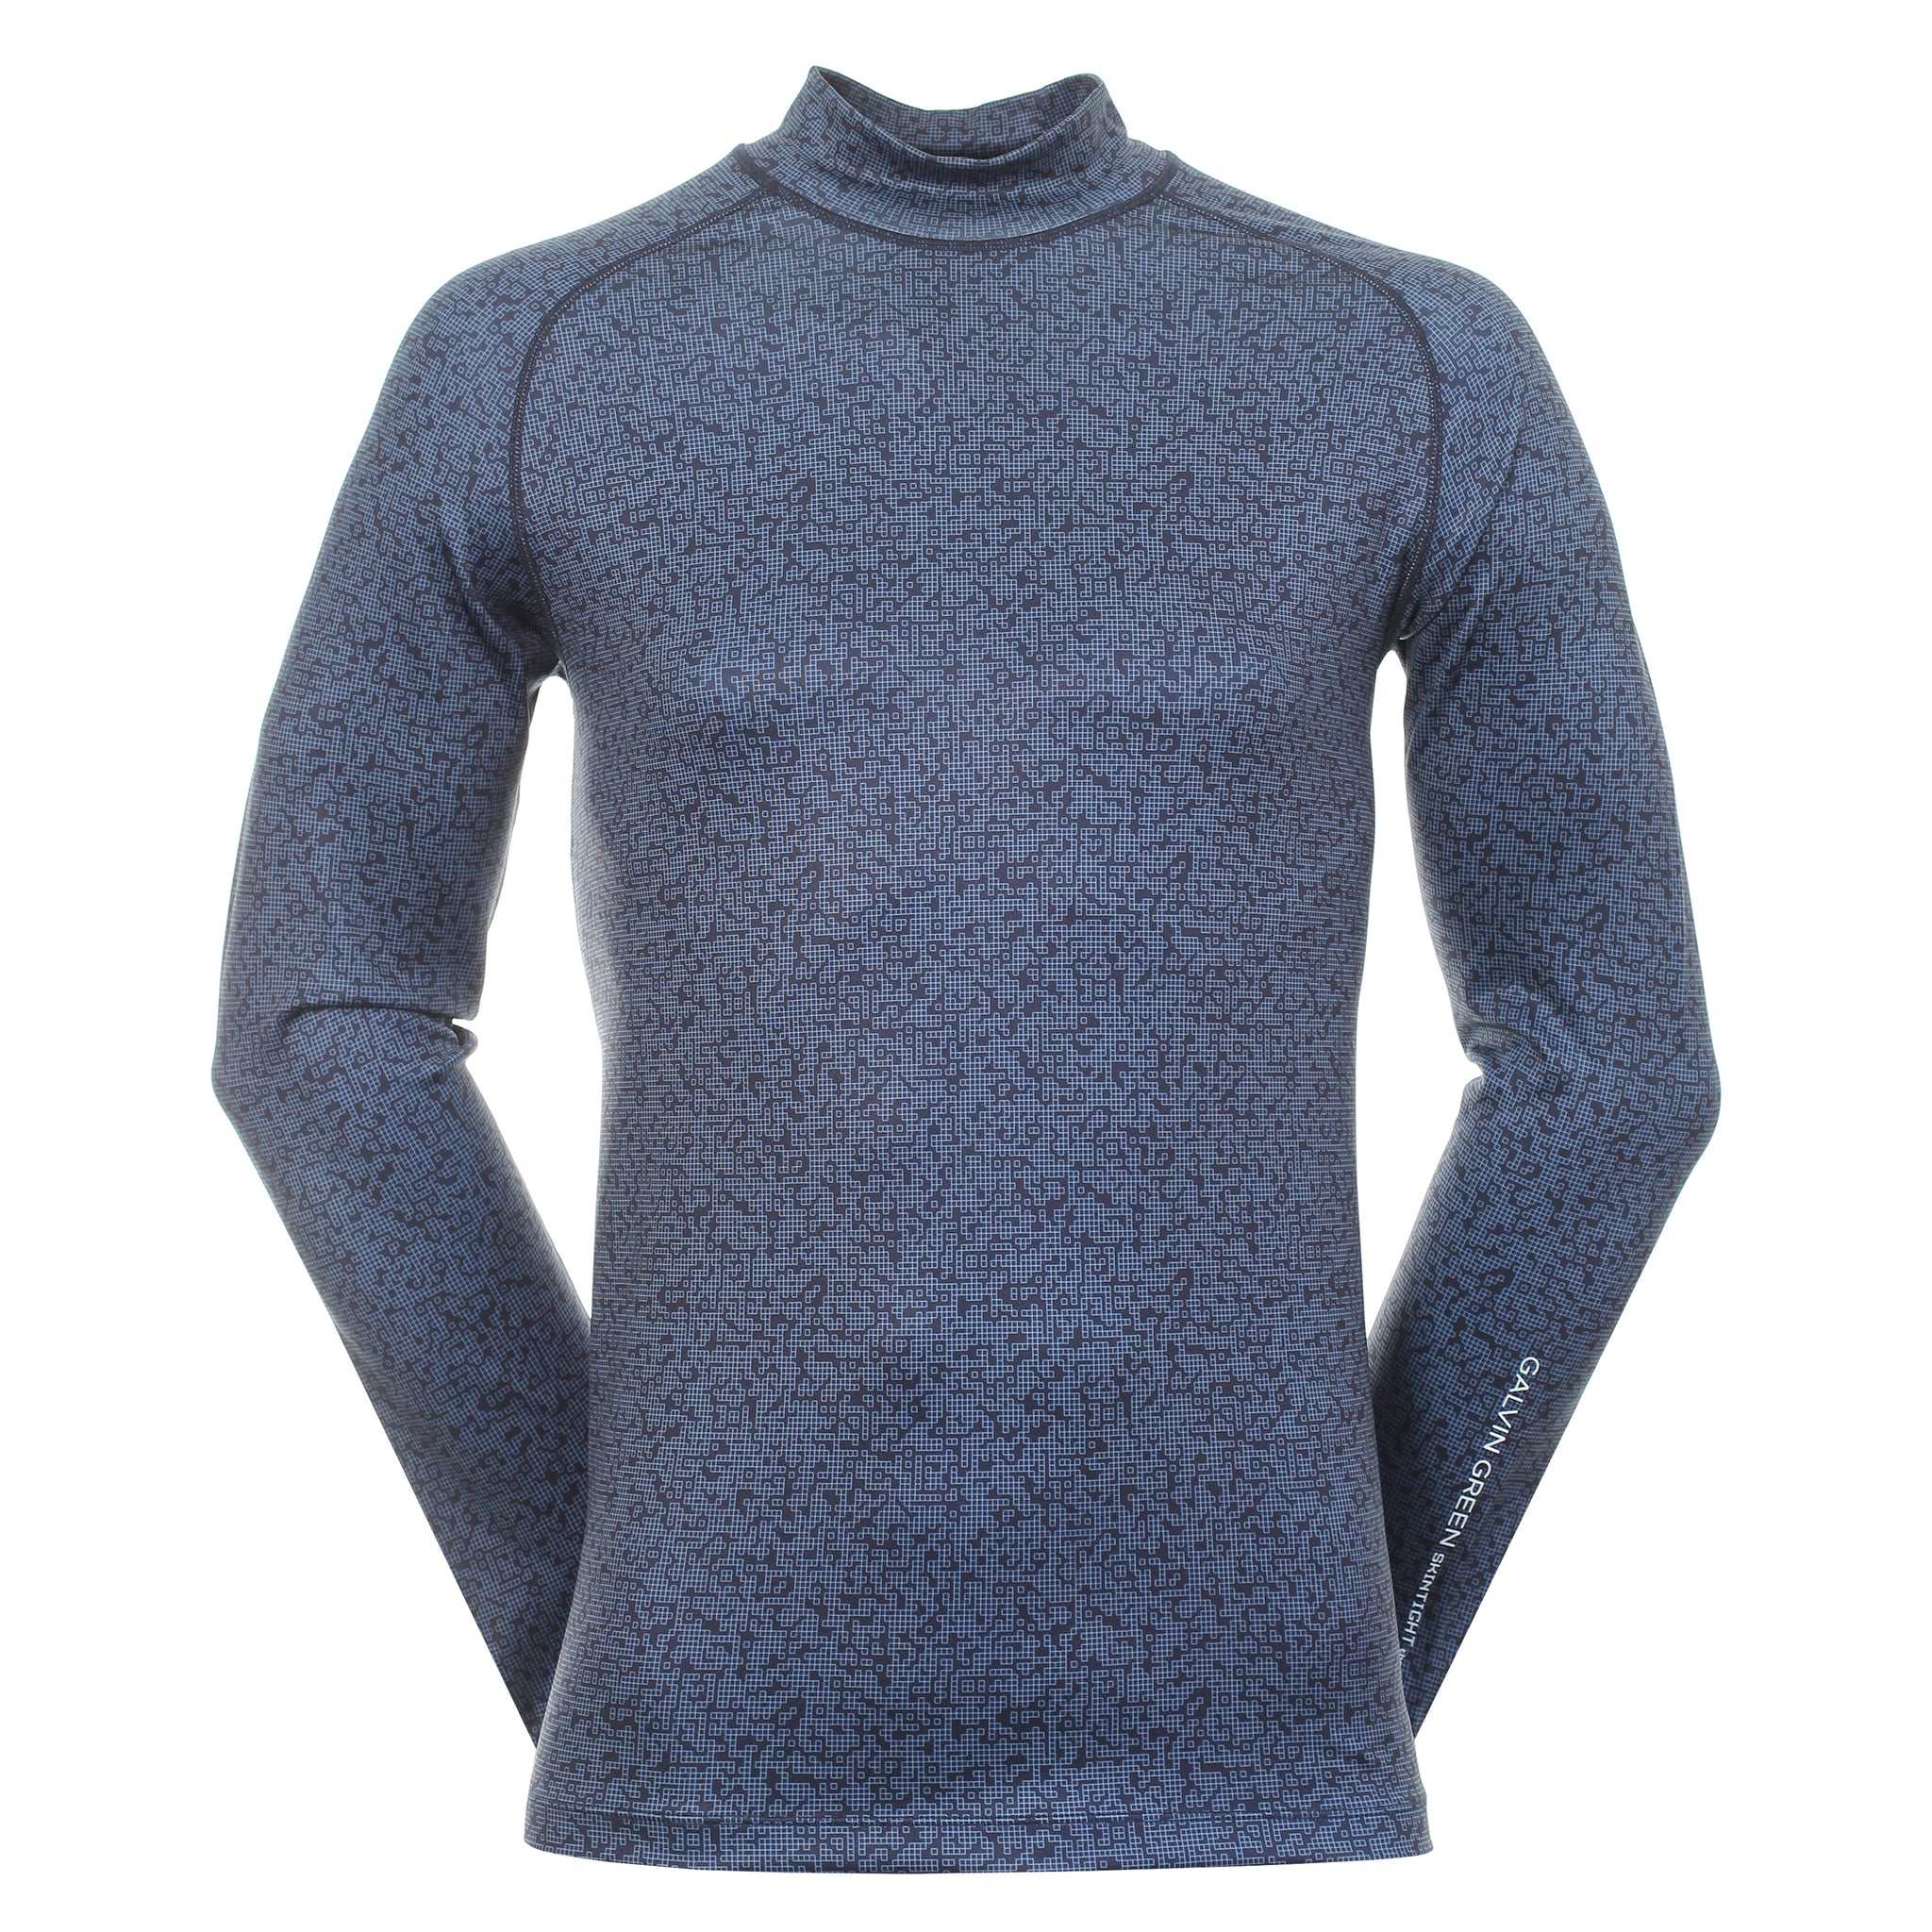 Galvin Green Ethan Thermal Base Layer